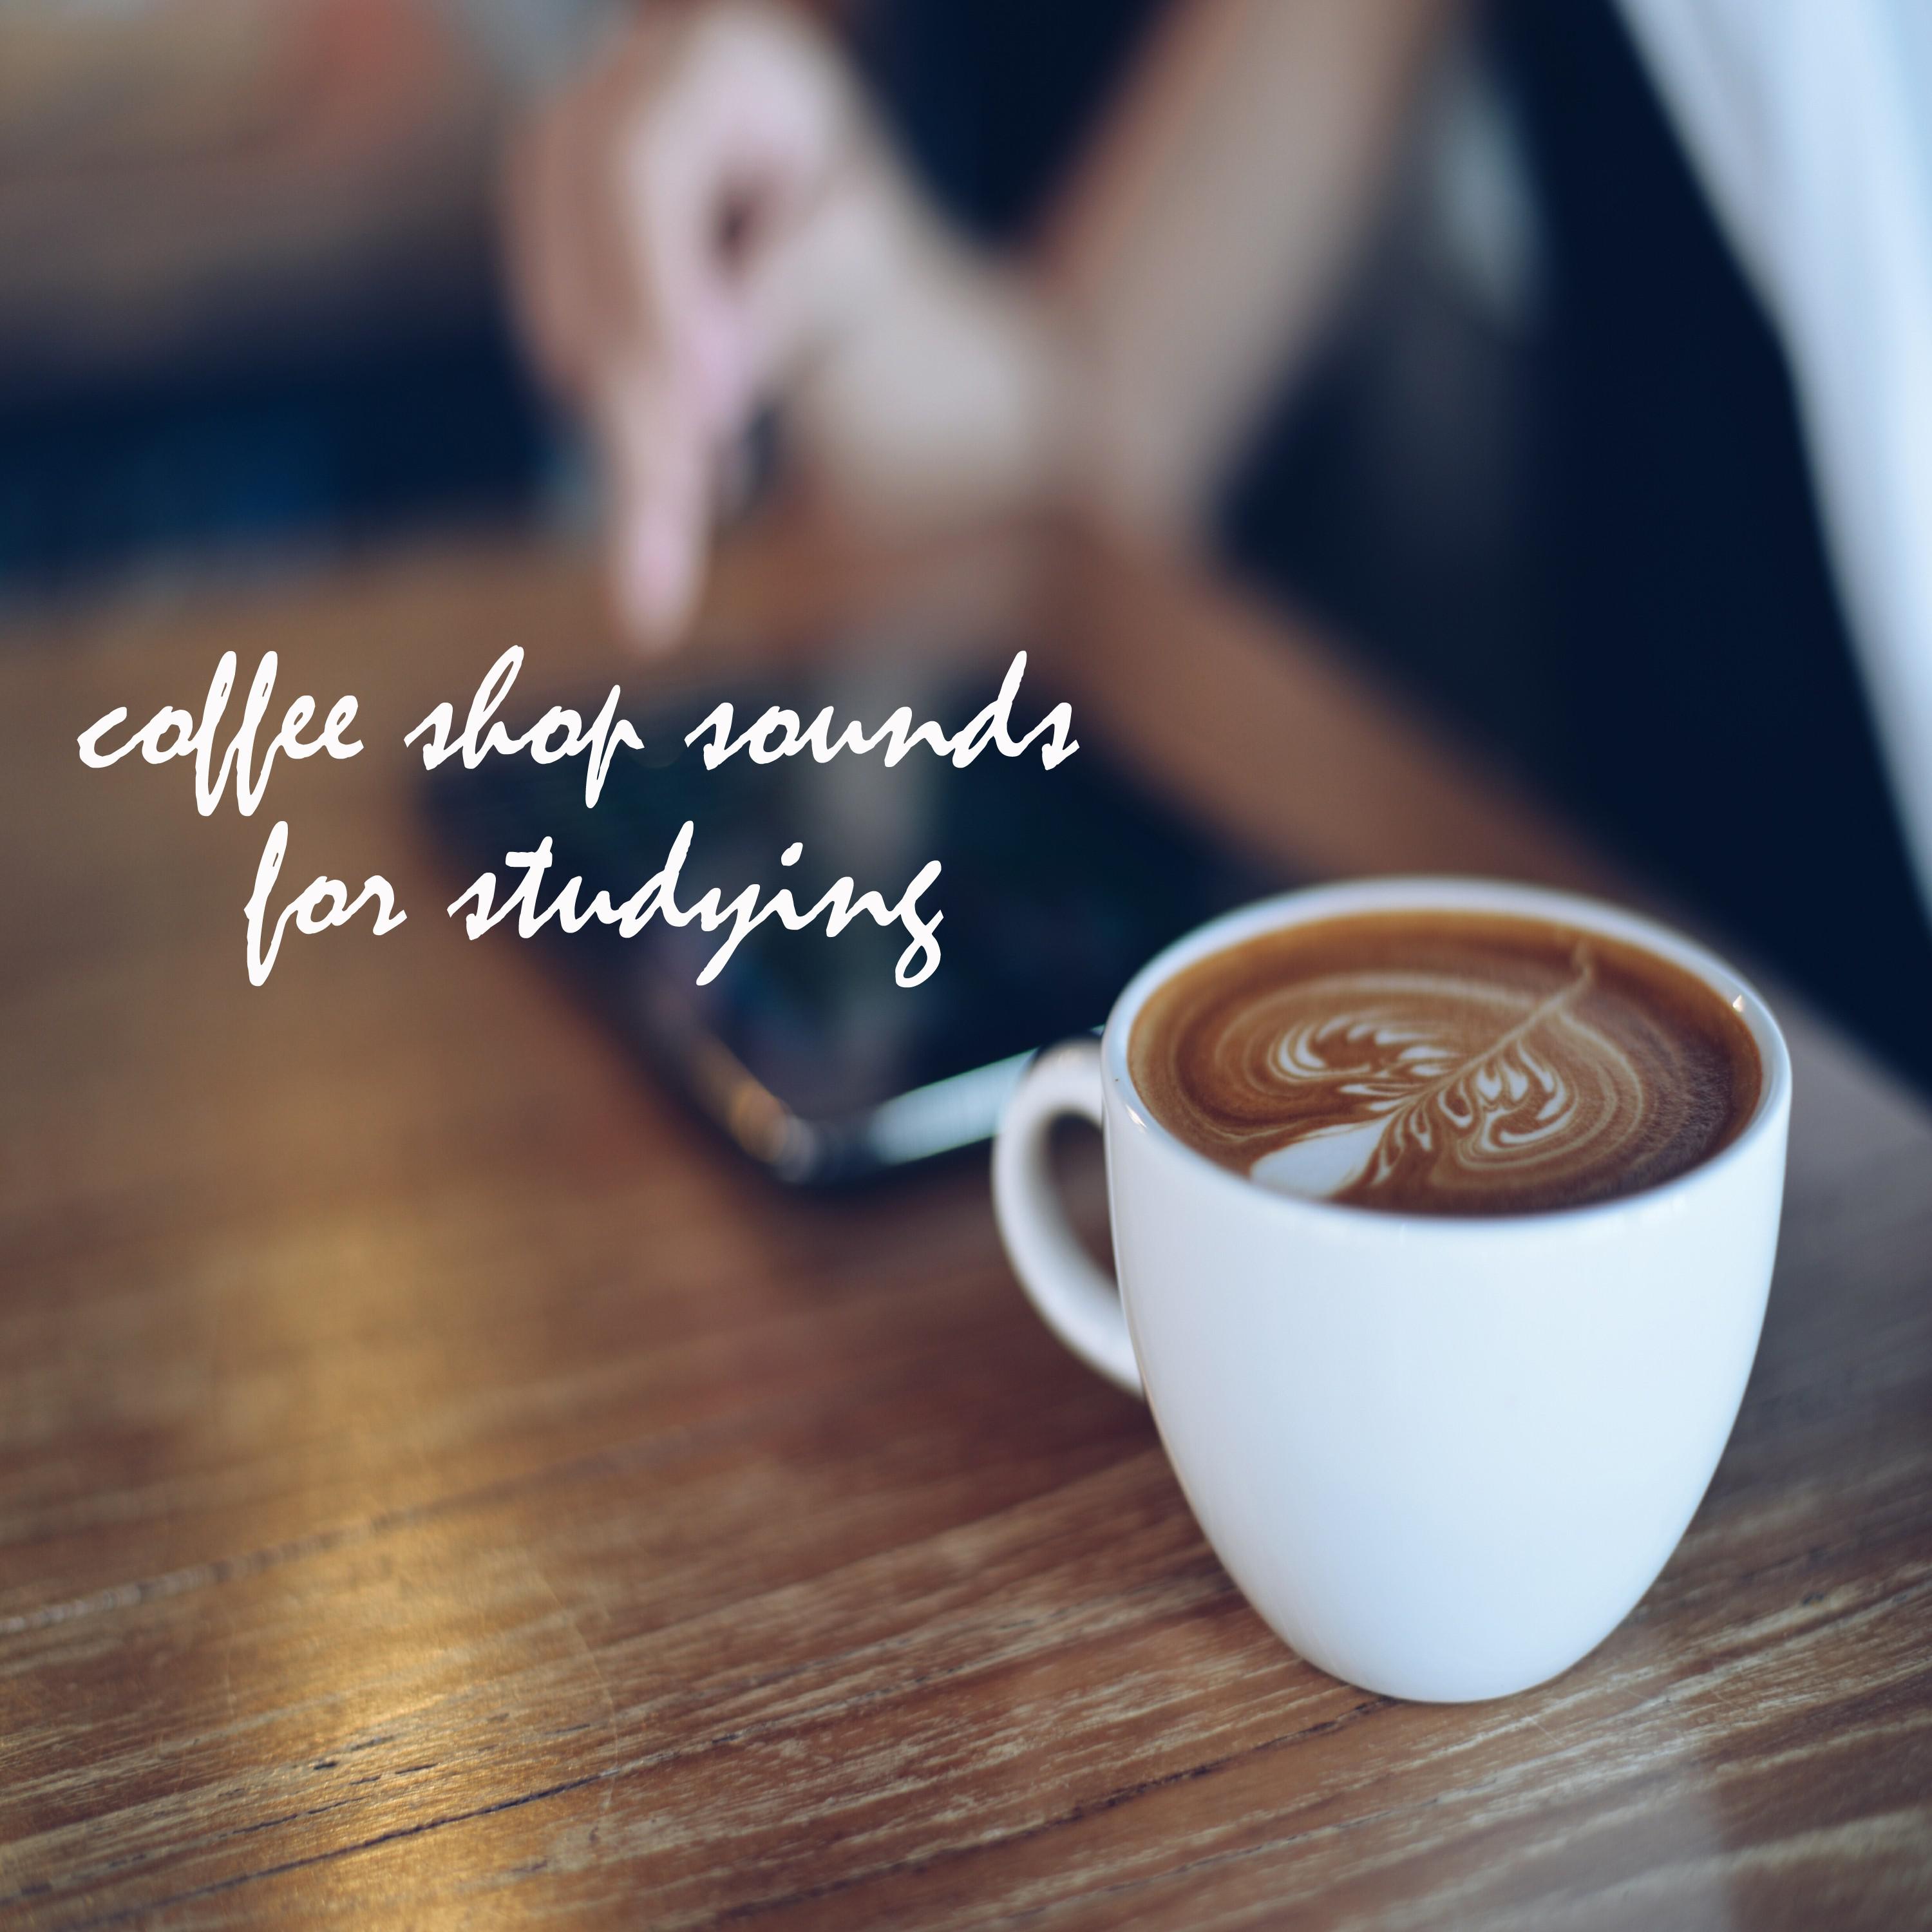 Coffee Shop Sounds for Studying and Working, Pt. 10